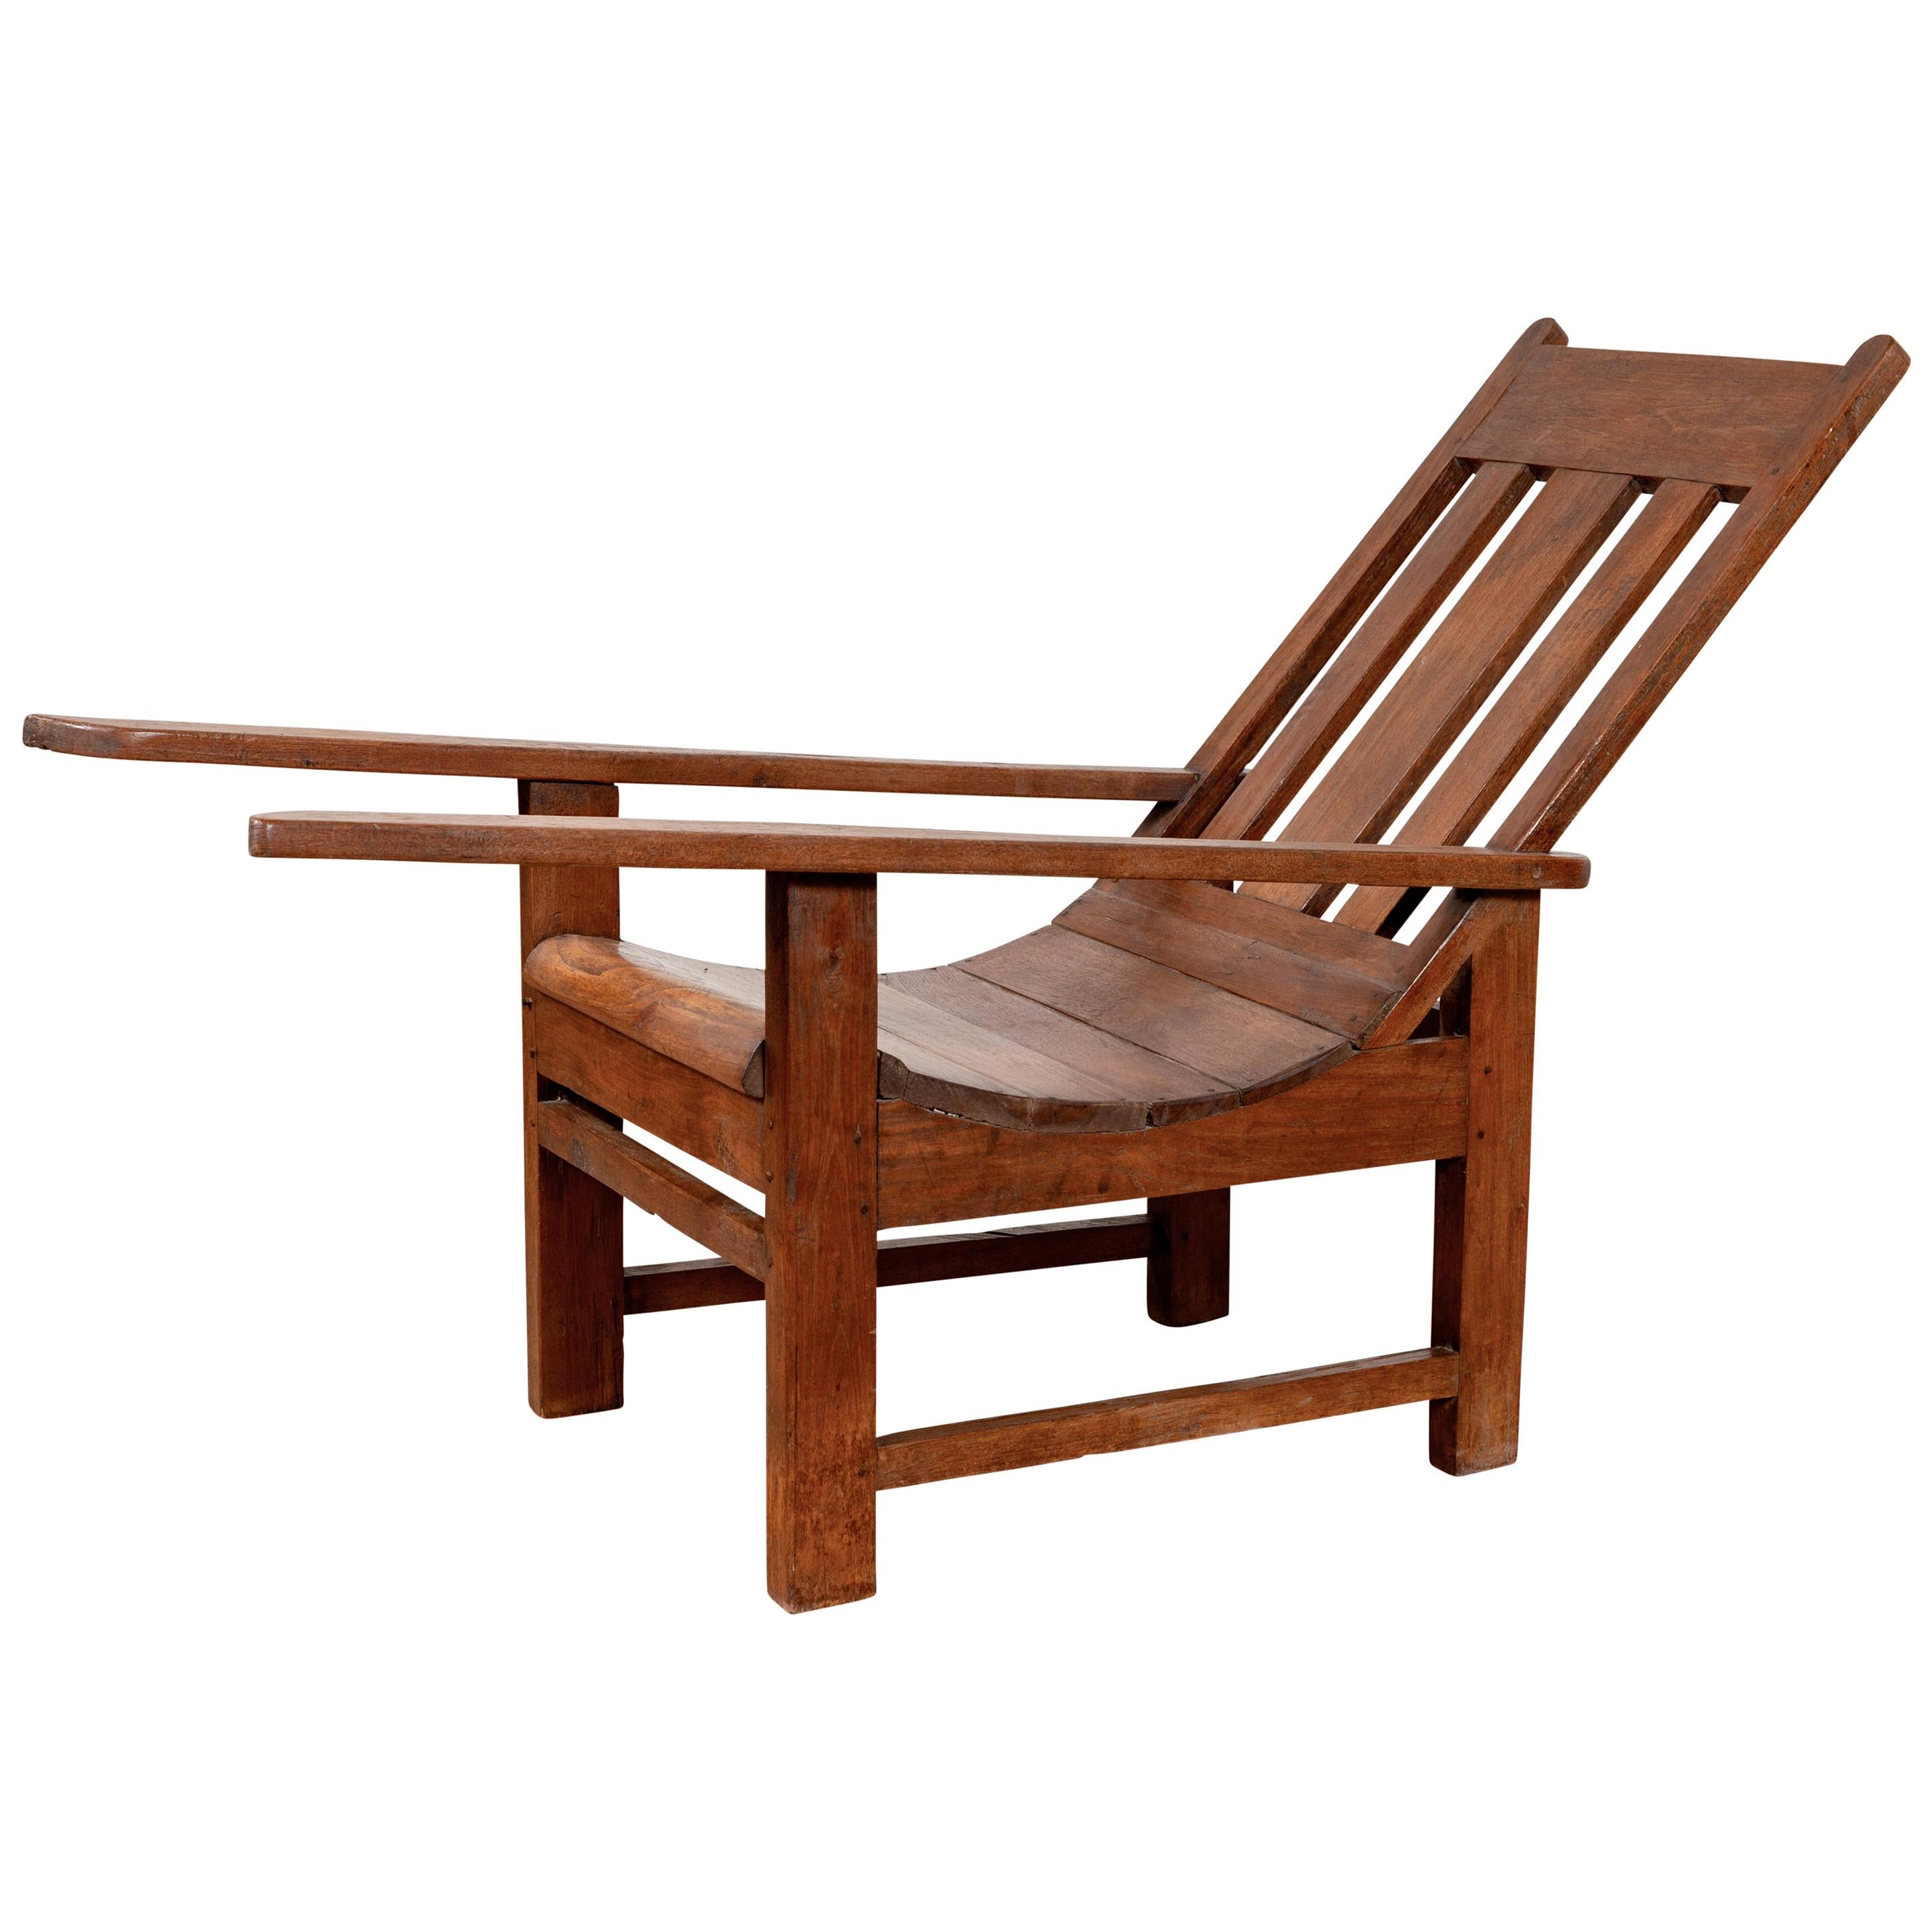 Antique Indonesian Teak Plantation Lounge Chair from Madura with Slanted Back For Sale